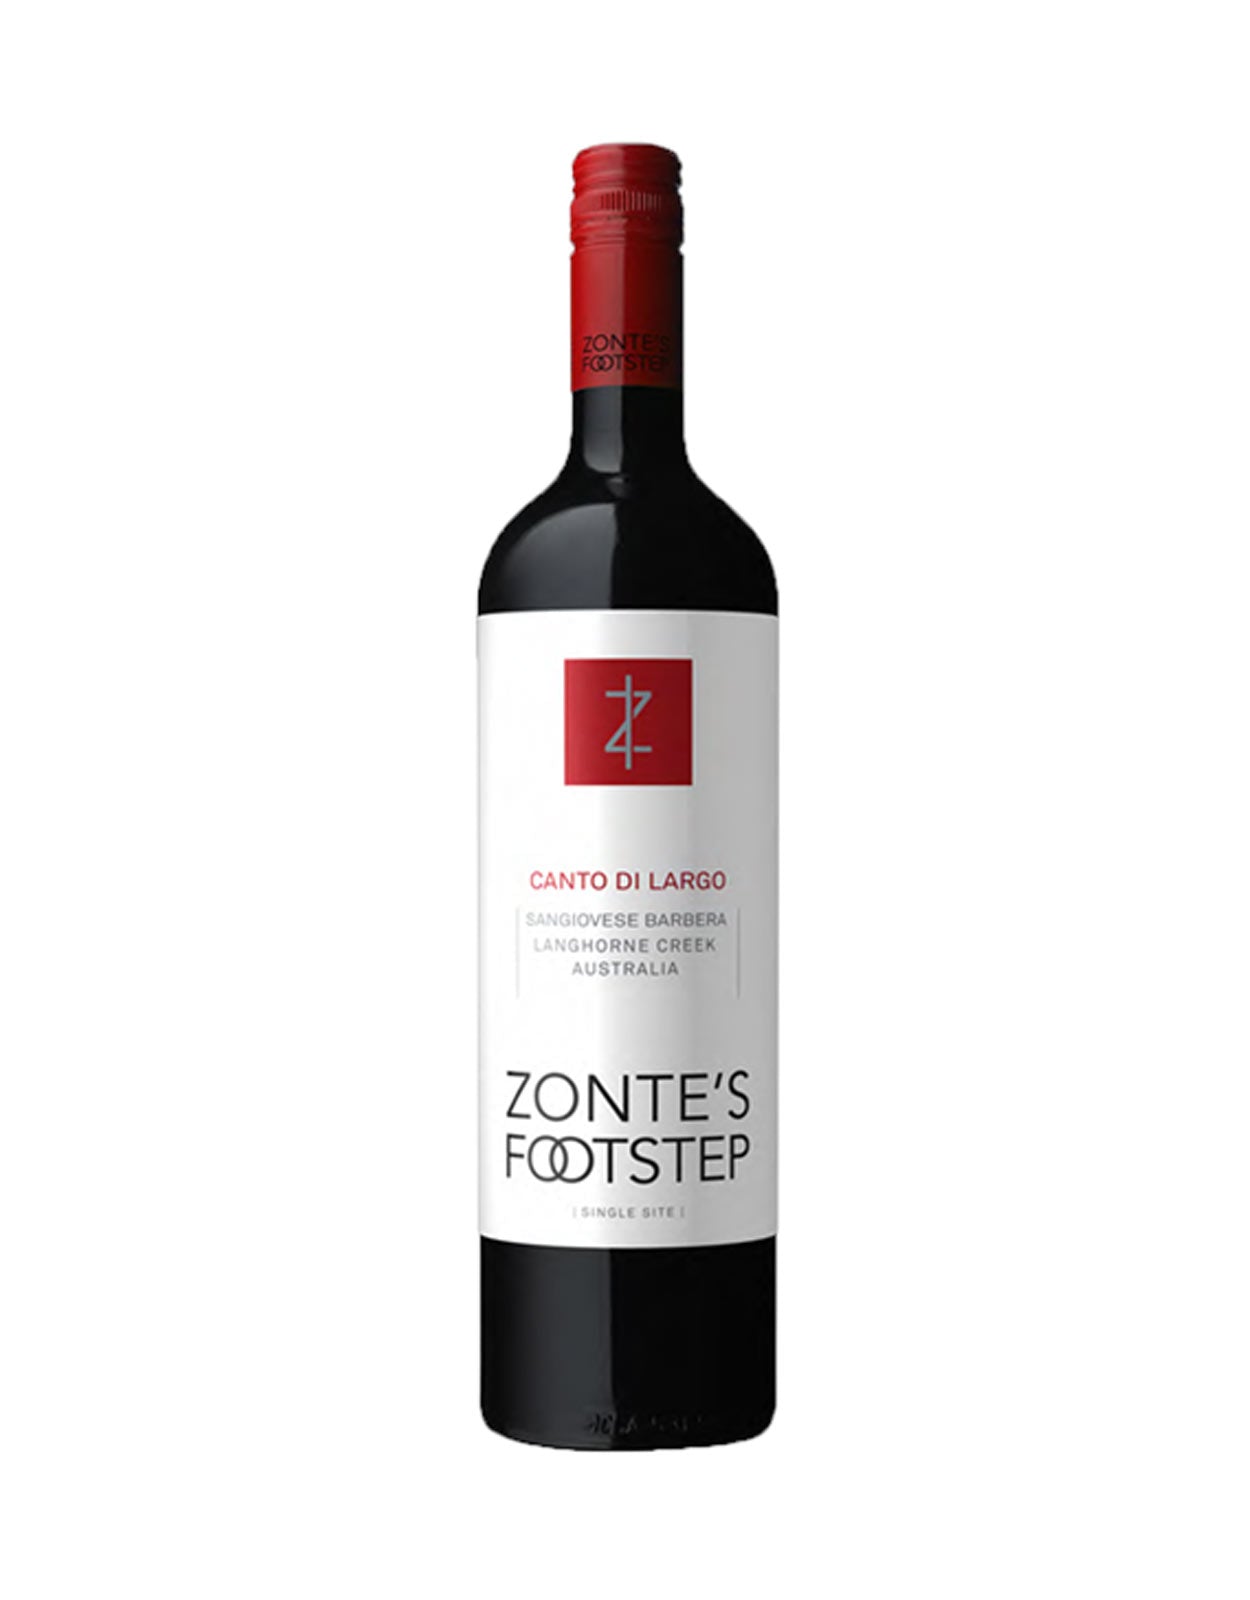 Zonte's Footstep Sangiovese Lagrein Canto 2018